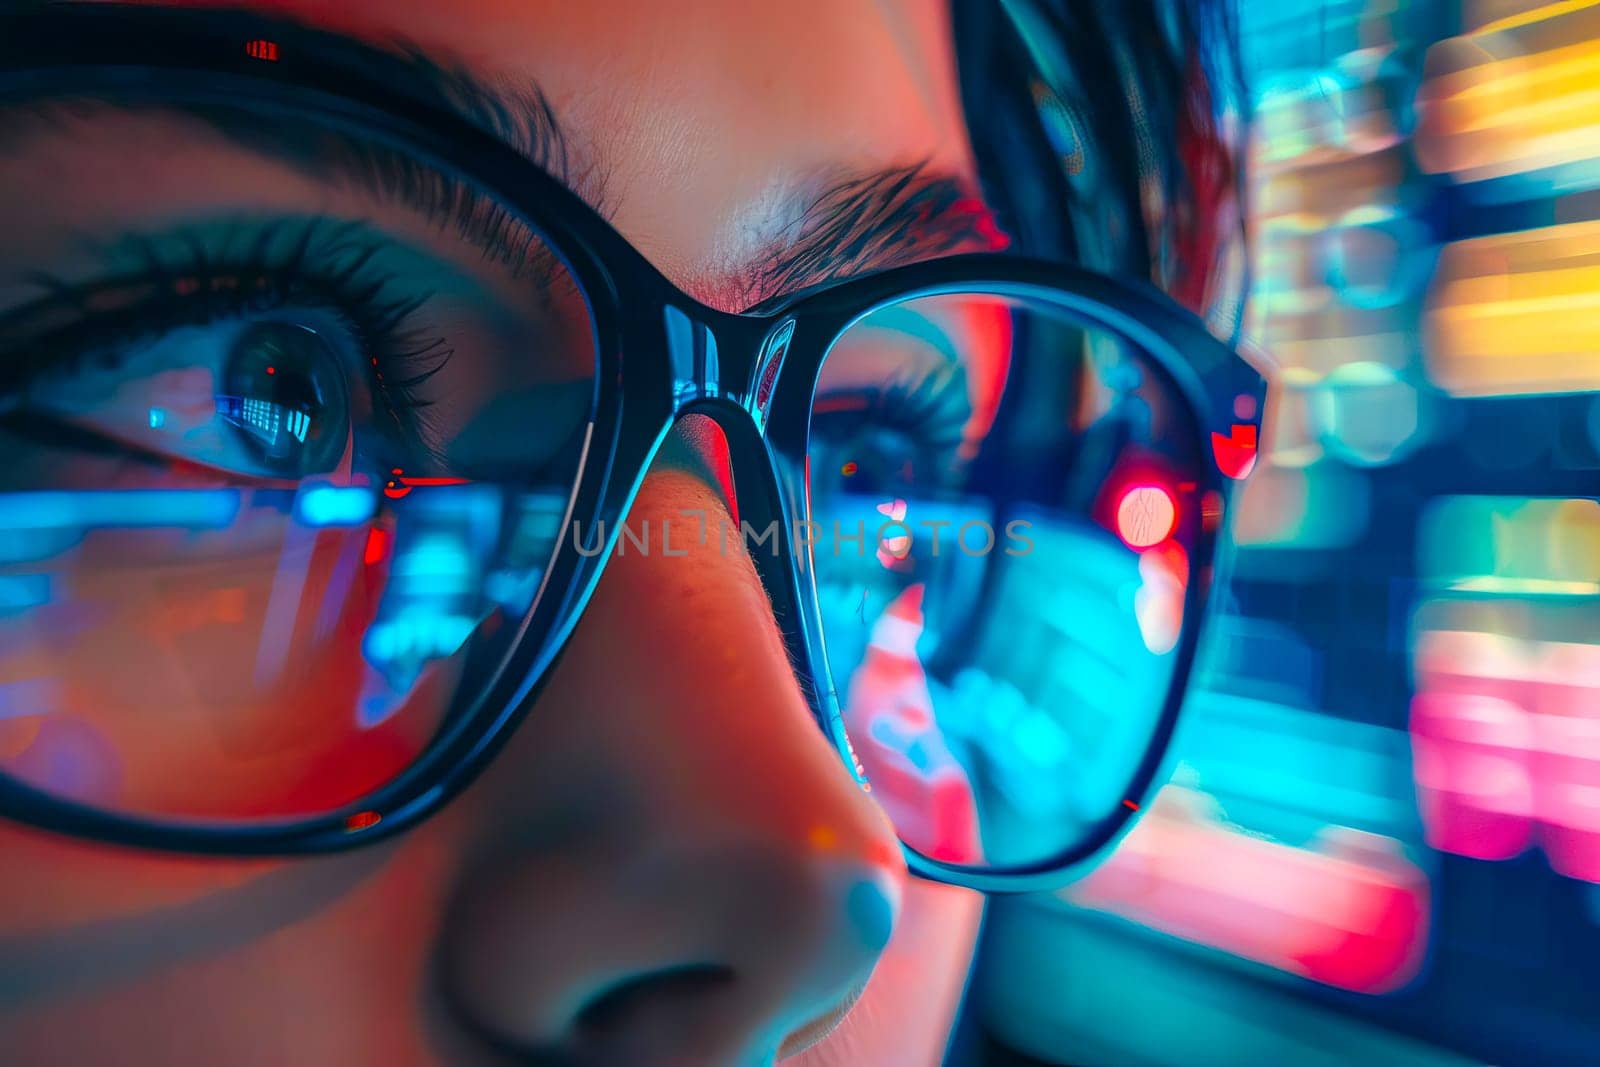 Close up view of a persons face wearing glasses, with a computer monitor reflecting in the lenses.